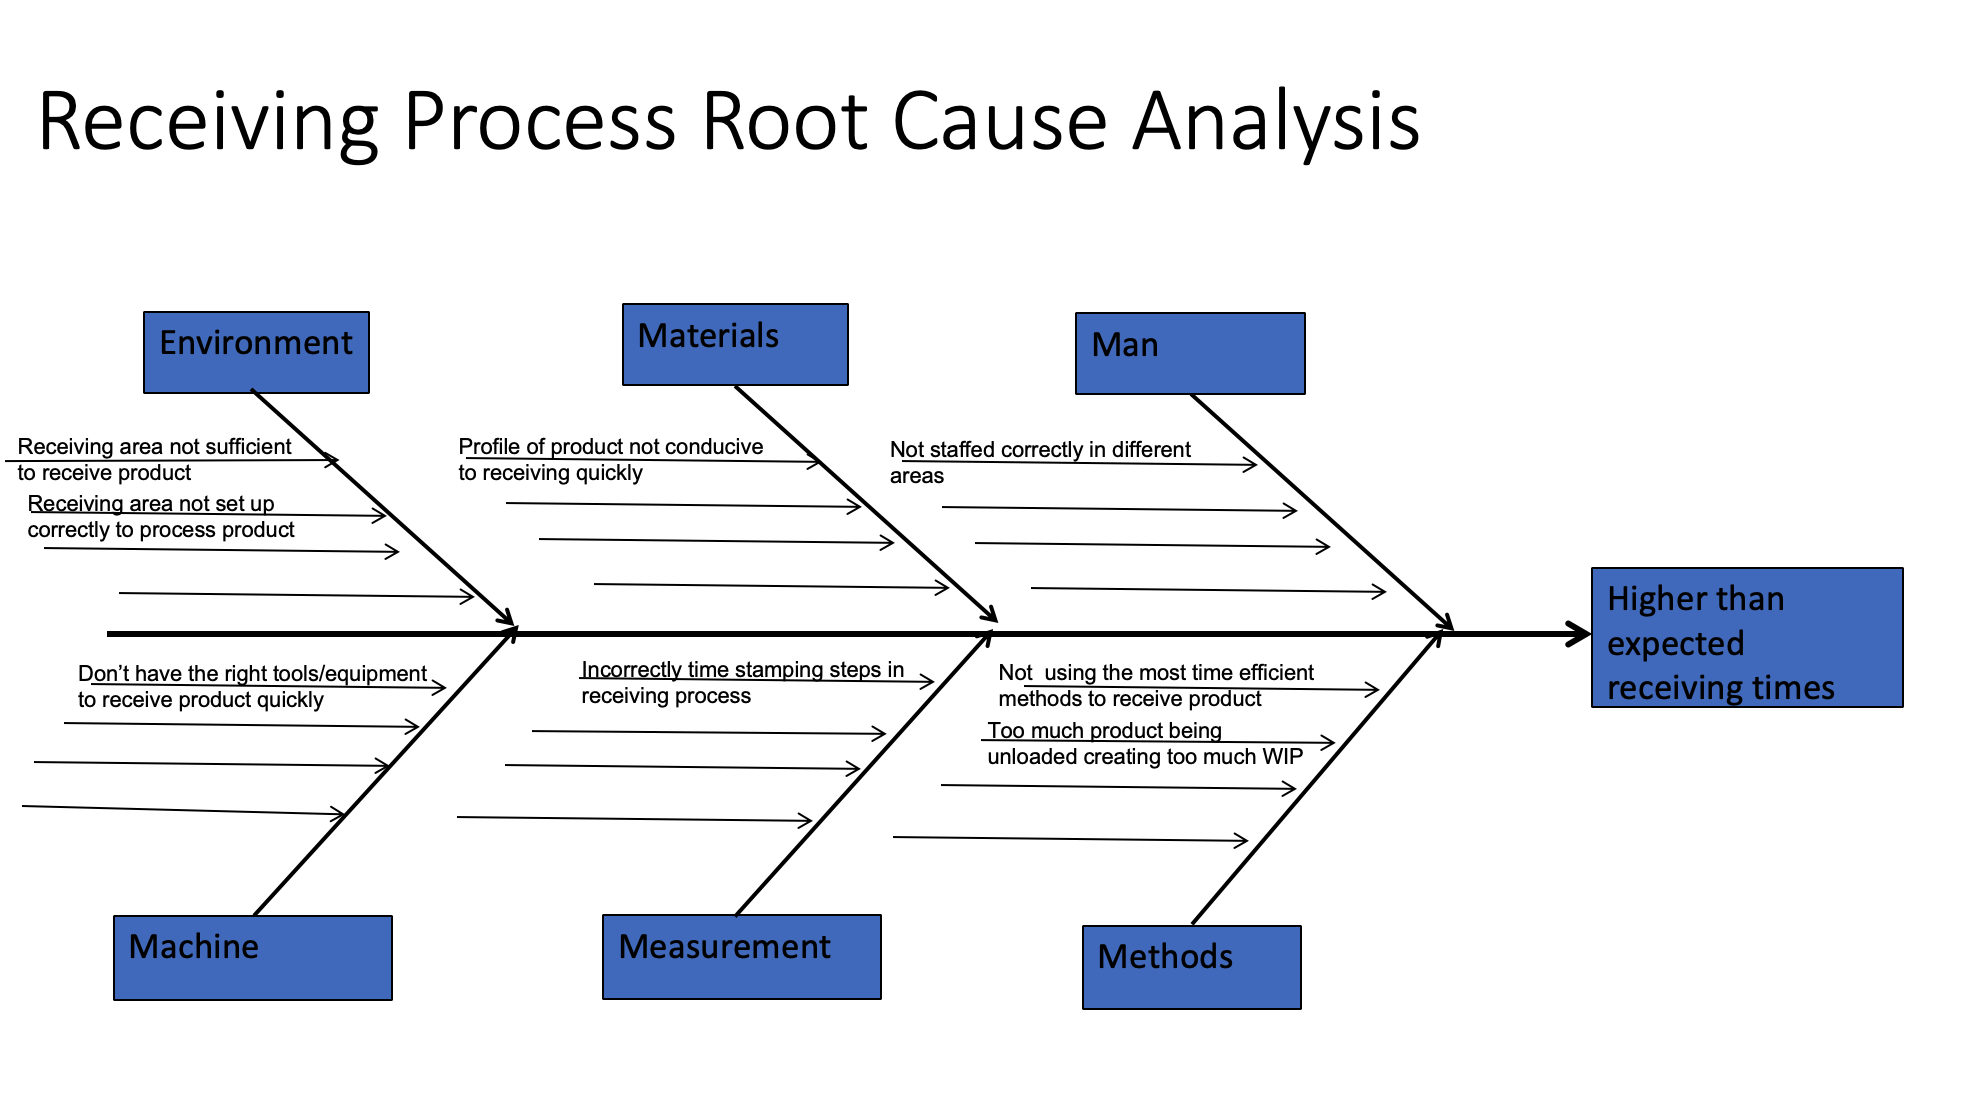 Root Cause Analysis chart investigating why receiving times are higher than expected